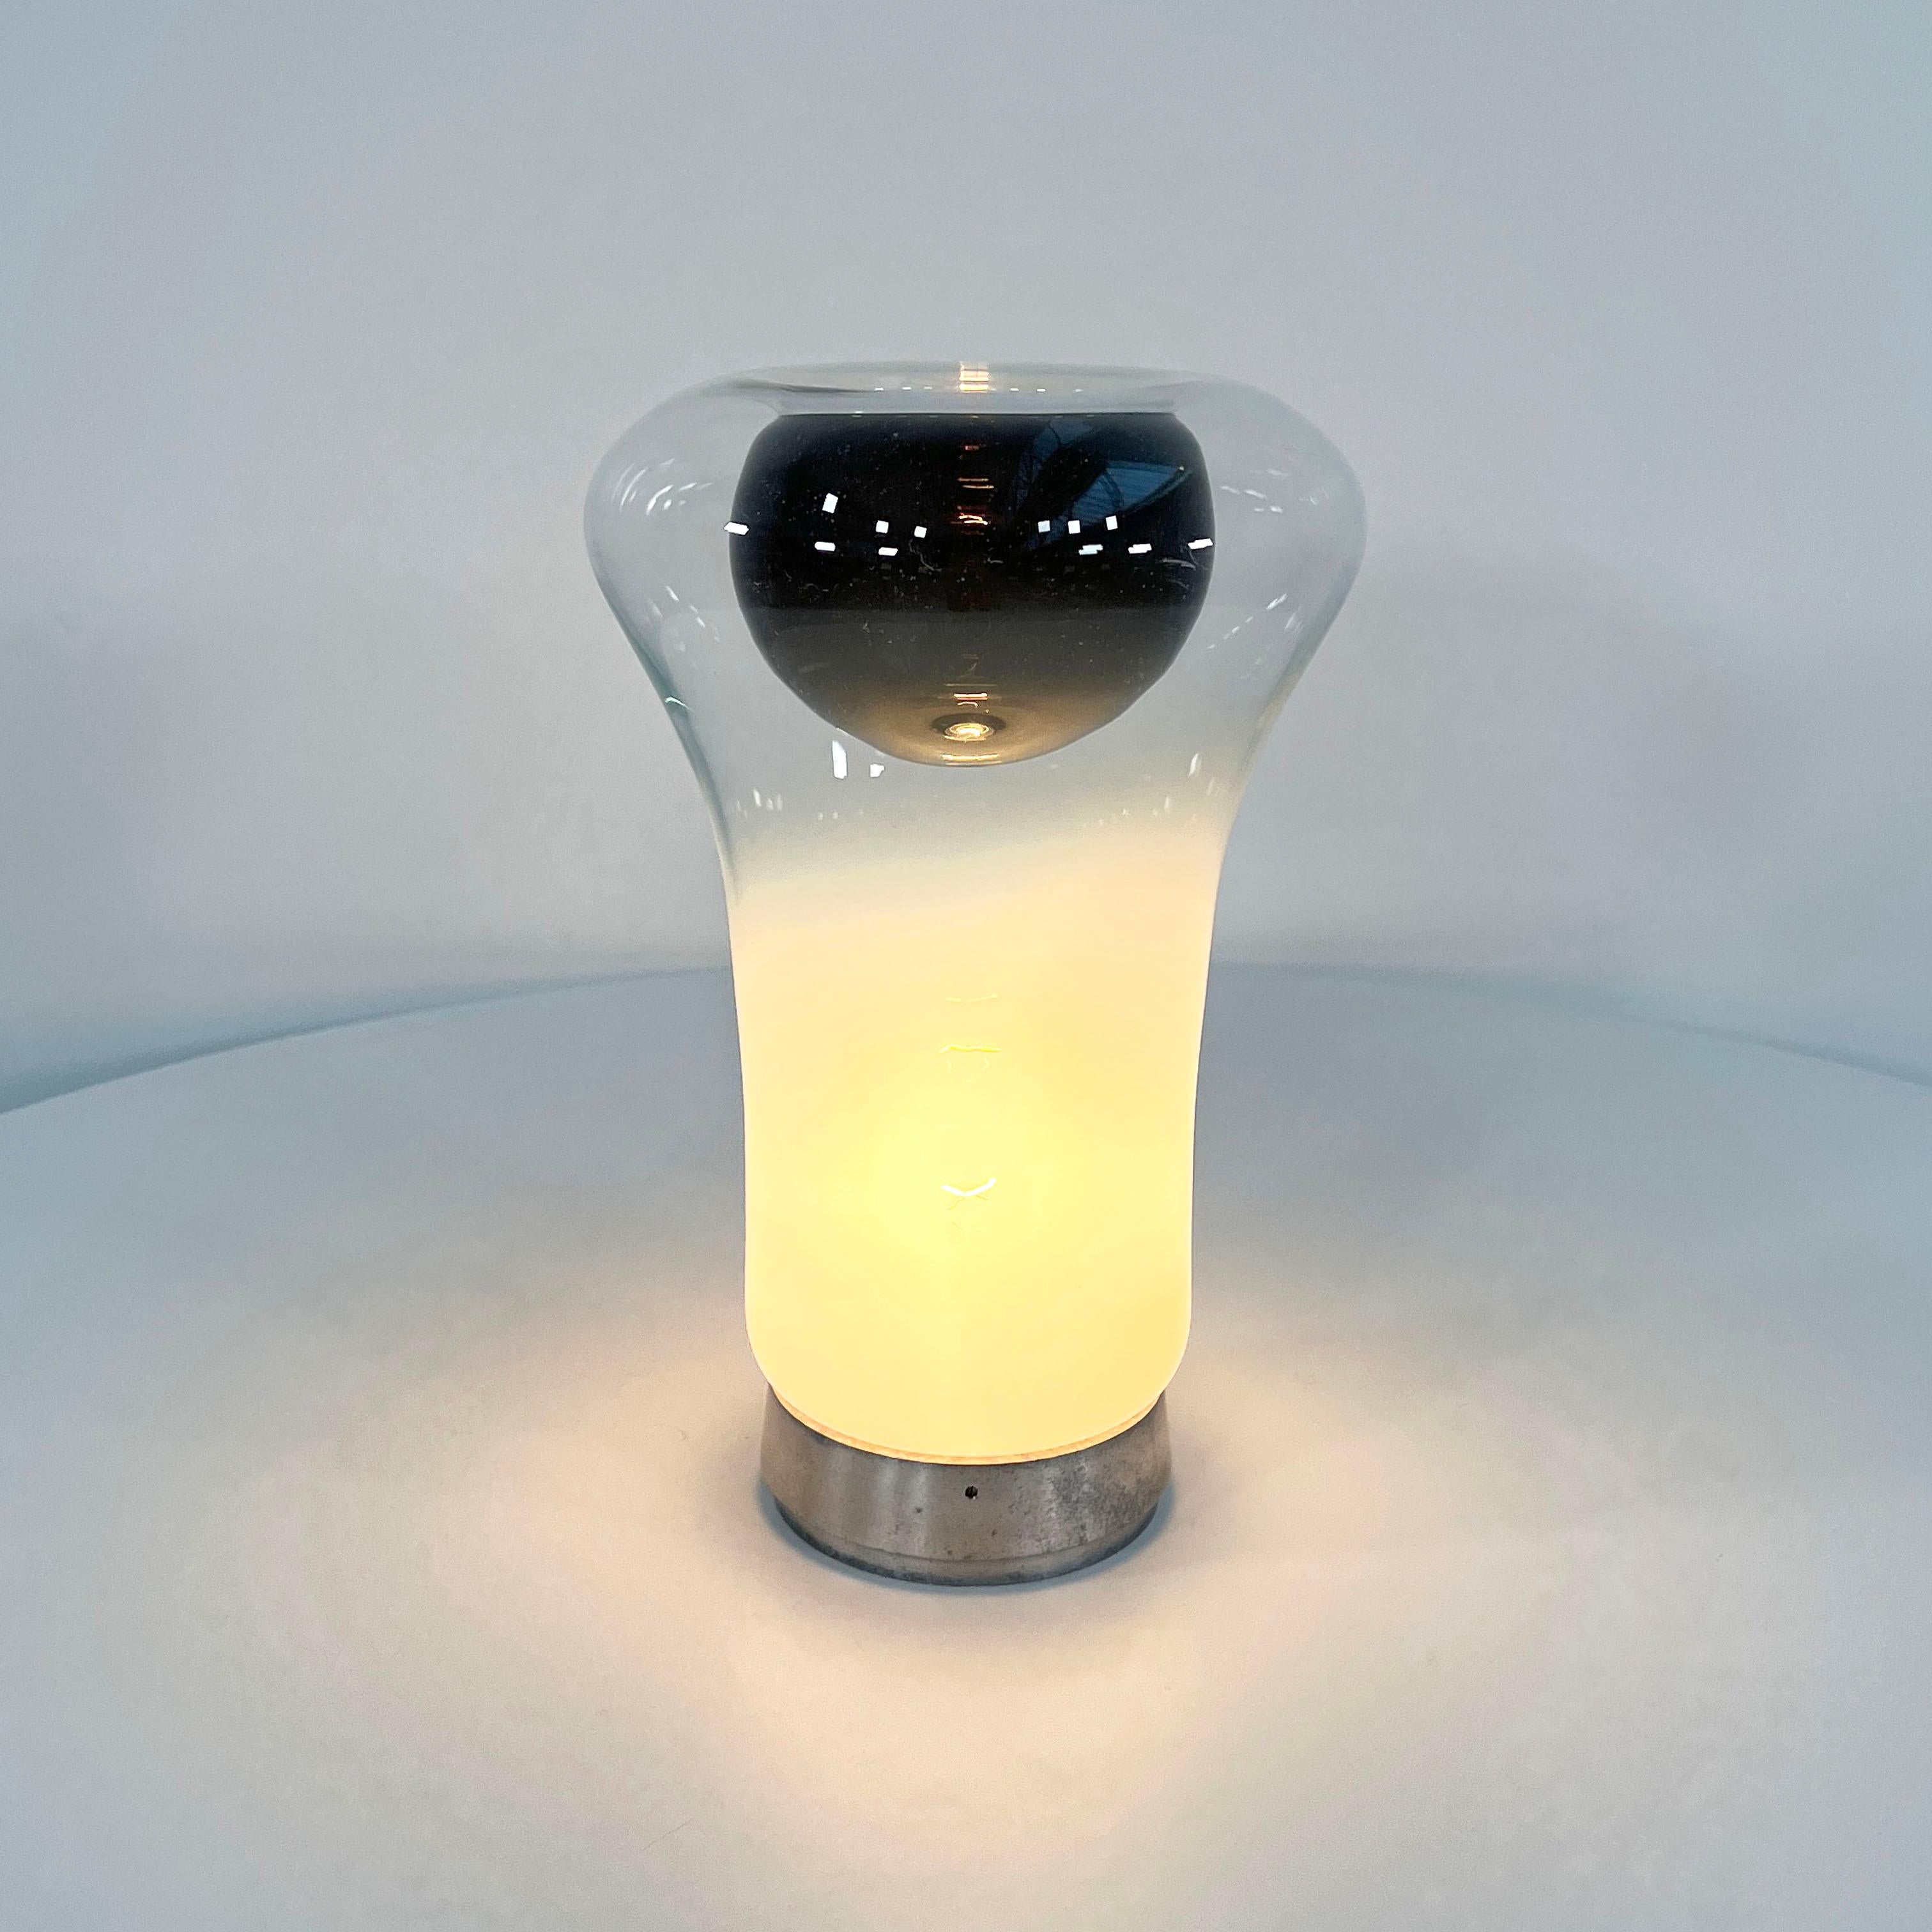 Designer - Angelo Mangiarotti
Producer - Artemide 
Model - Saffo Table Lamp
Design Period - Seventies
Measurements - Width 21 cm x Depth 21 cm x Height 33 cm
Materials - Glass, Aluminum
Color - White, Black
Light wear consistent with age and use.